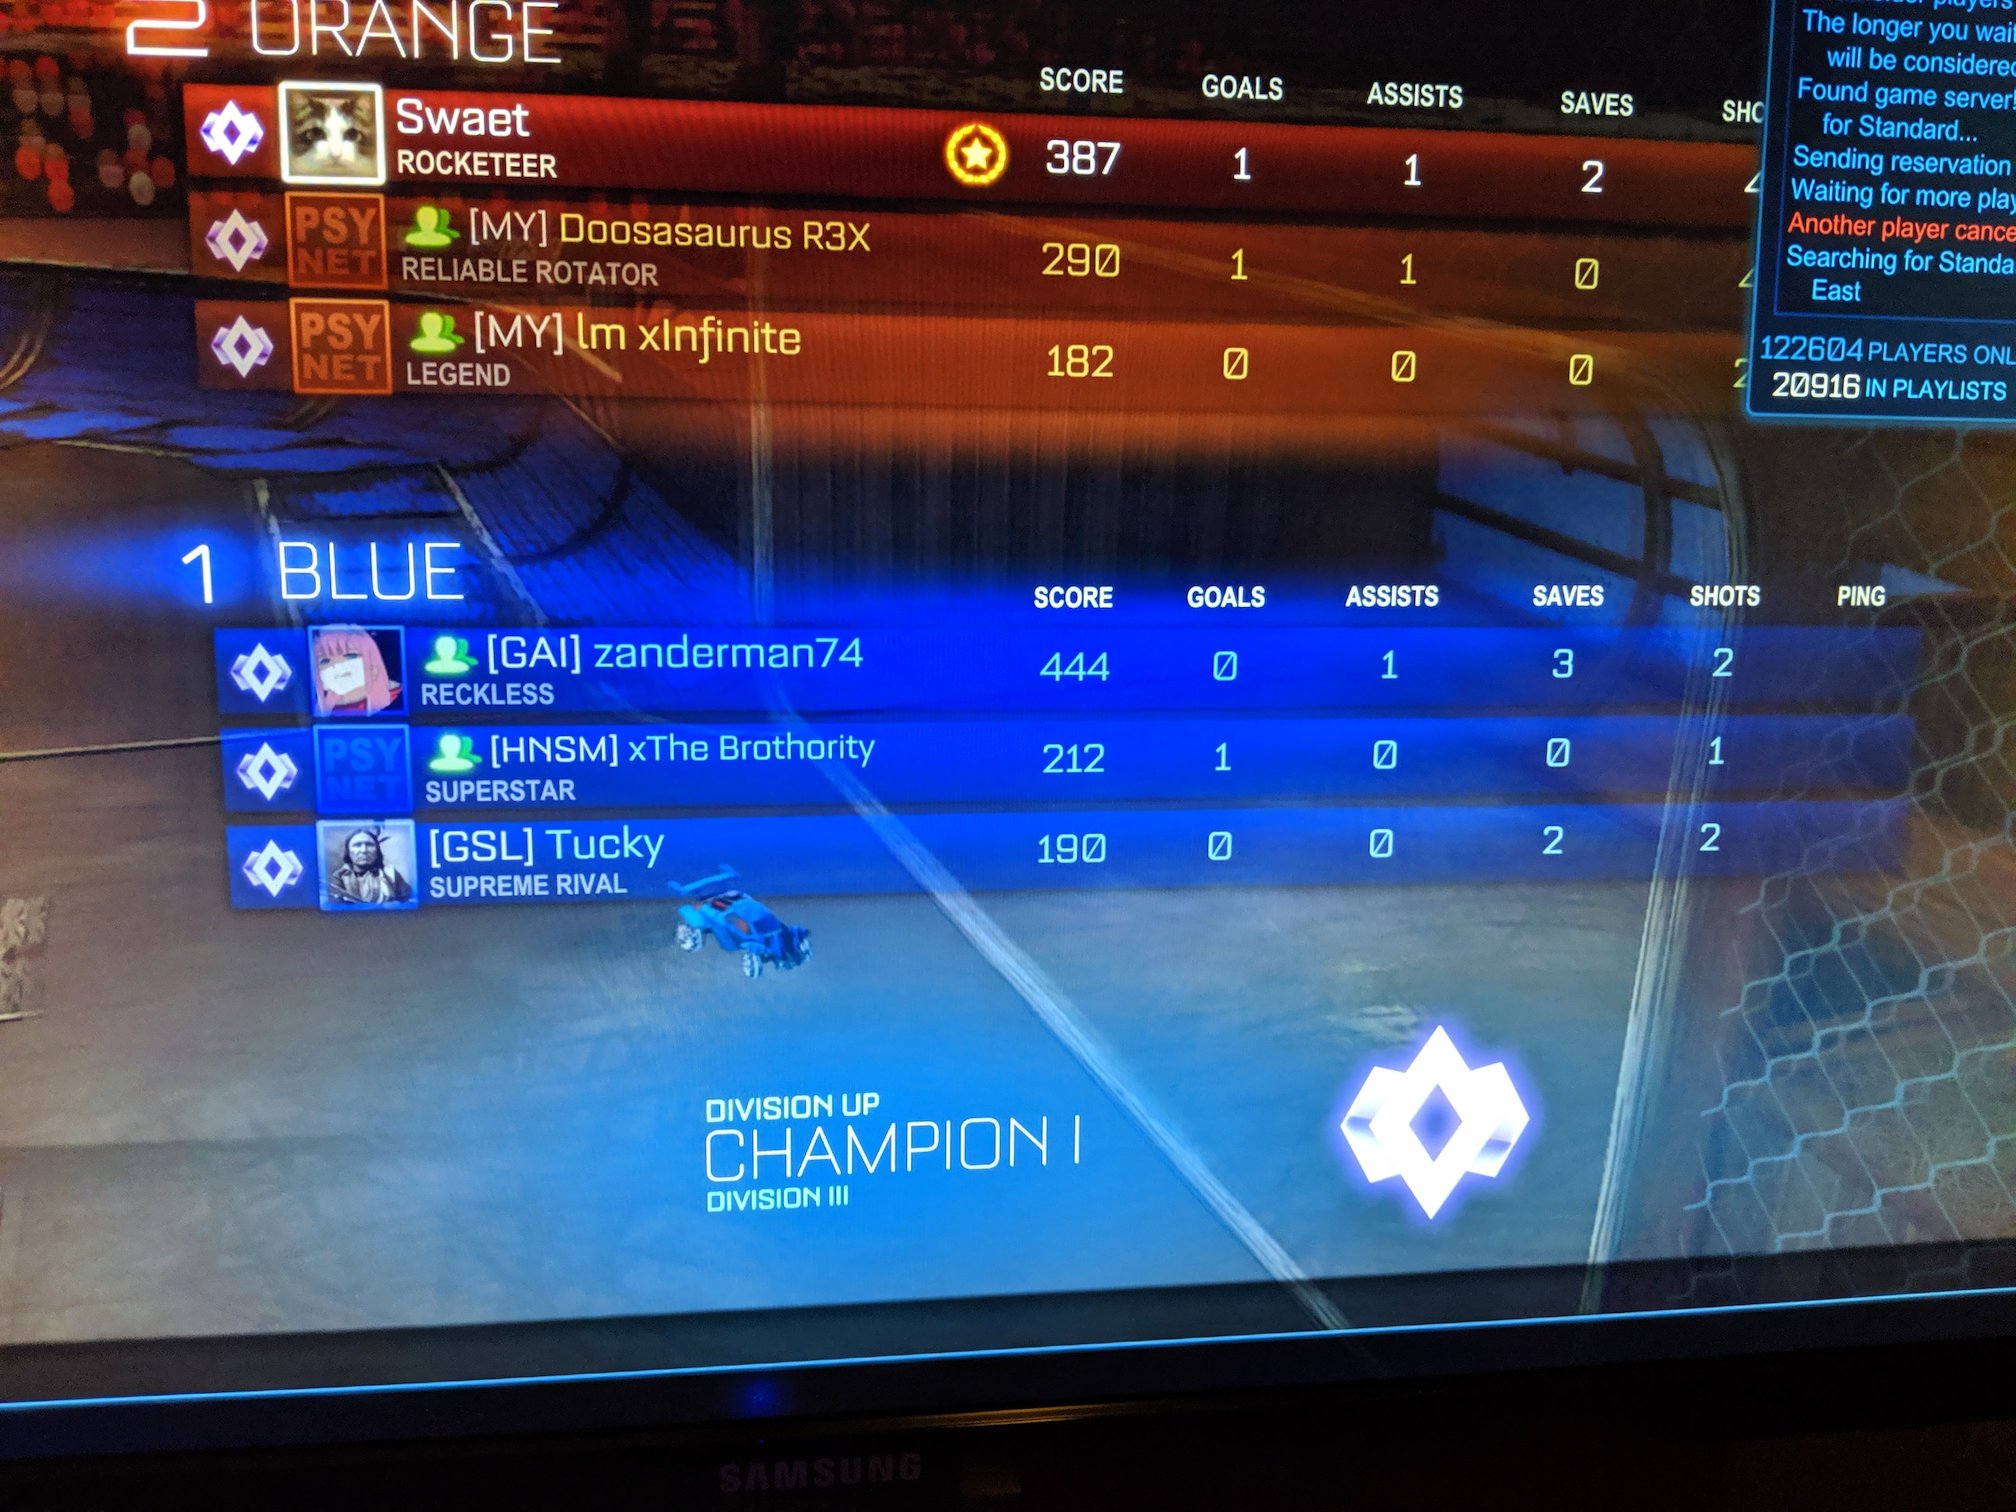 The scoreboard after the game I ranked up to Champion I Division III during Rocket League Season 10